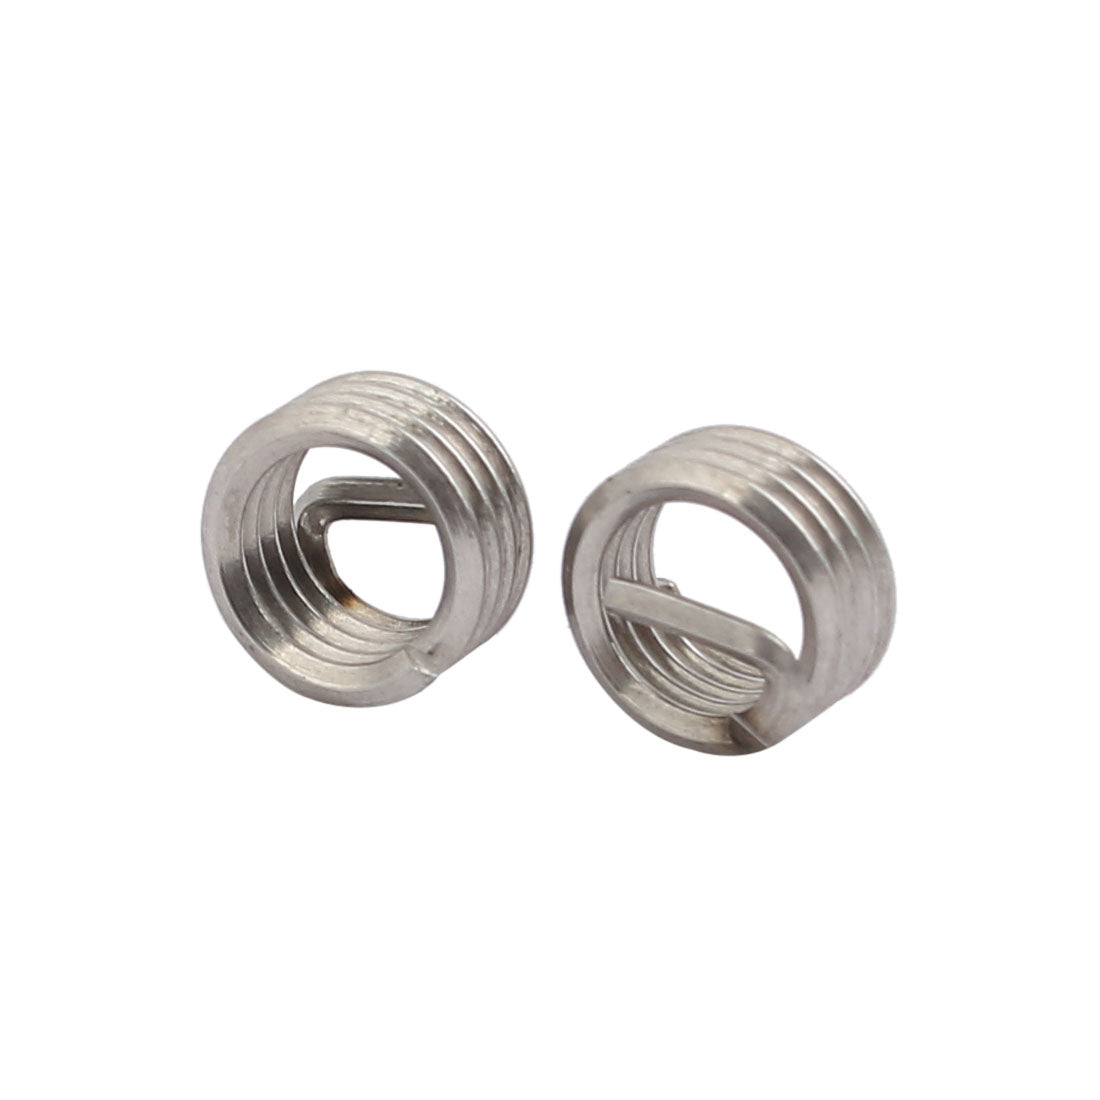 uxcell Uxcell M5x0.8mmx5mm 304 Stainless Steel Helical Coil Wire Thread Insert 25pcs